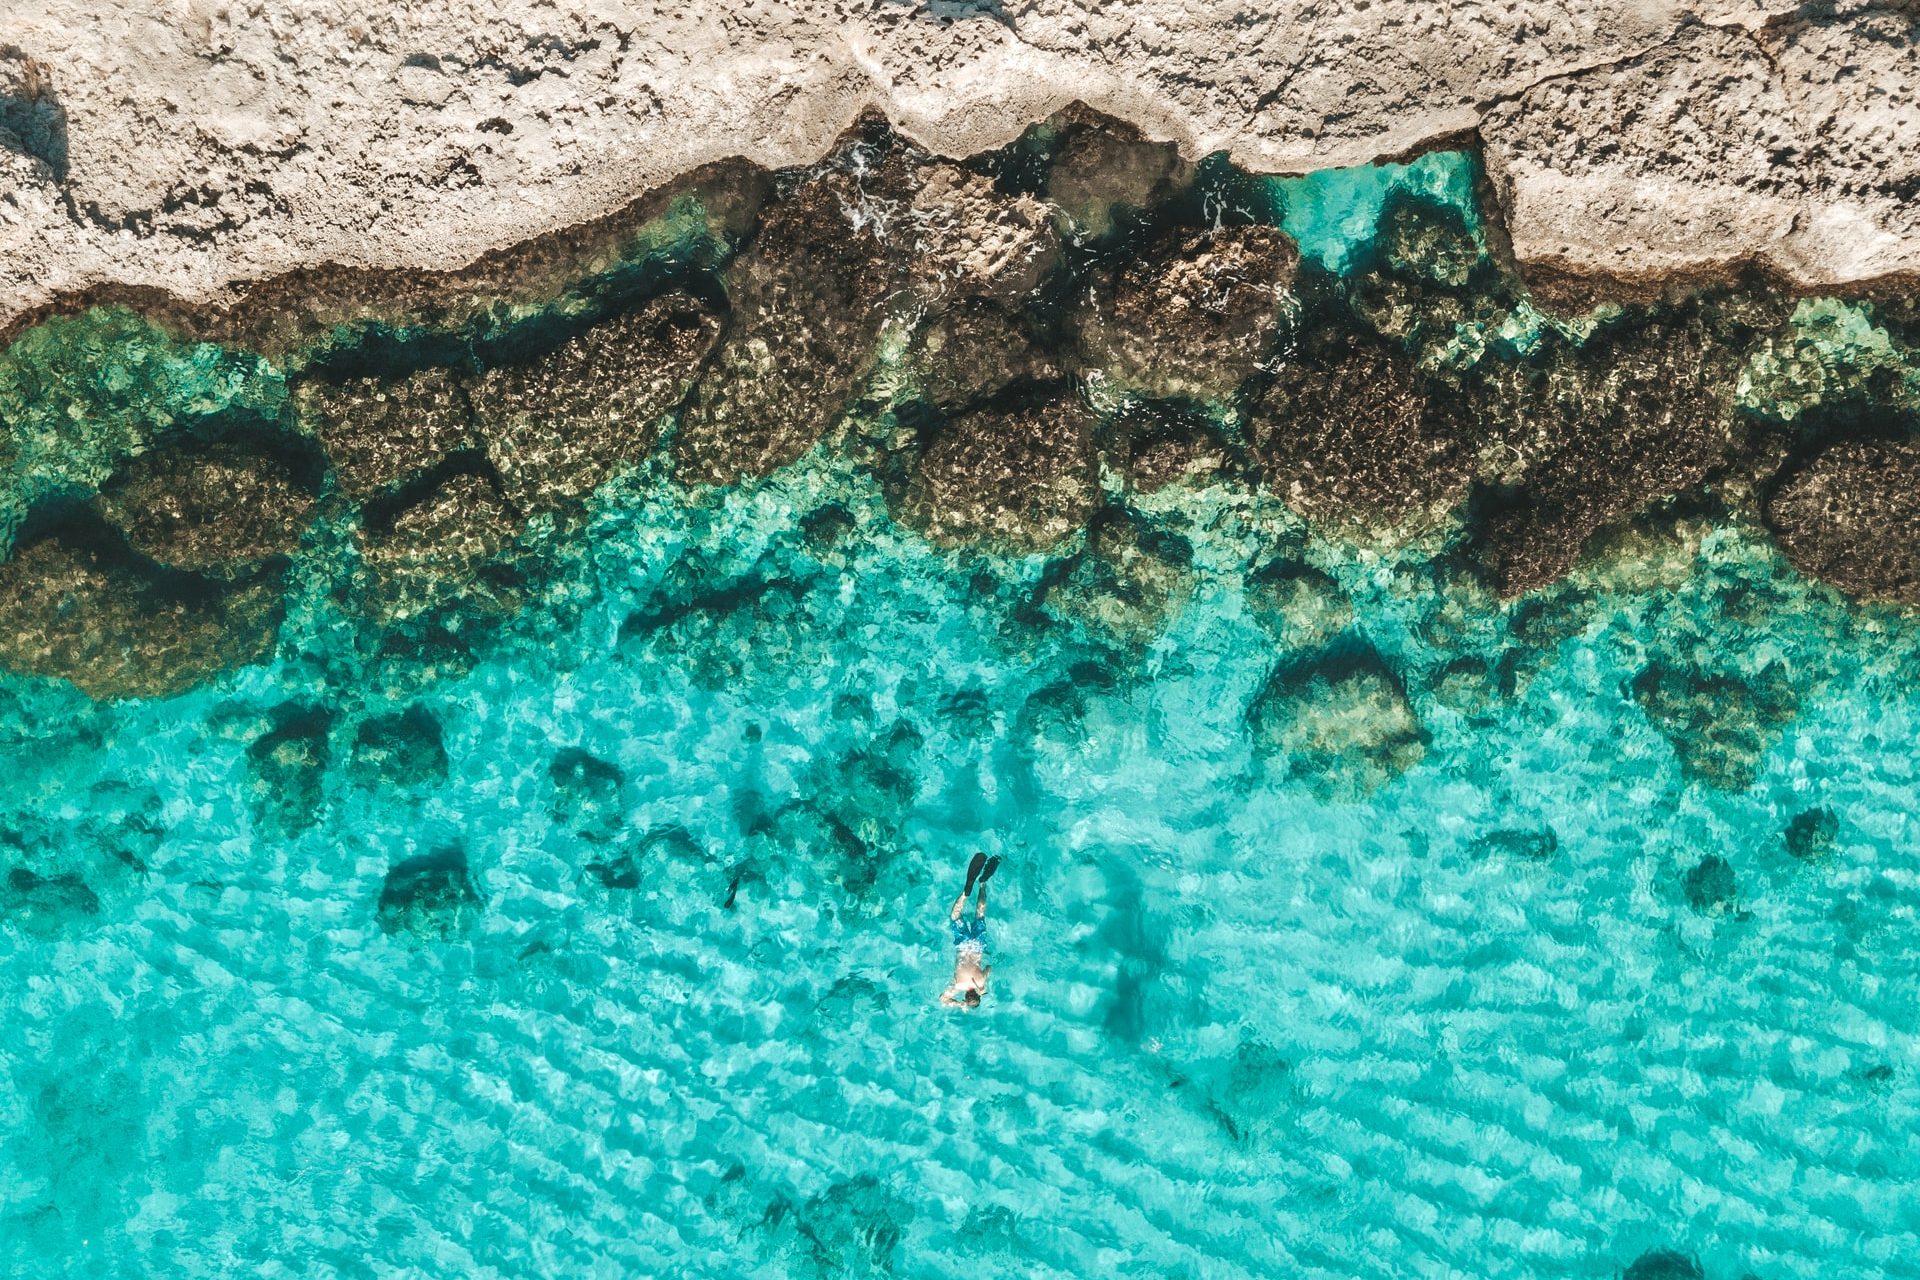 <p>There are two recommended activities in Aruba: taking a jeep safari through the island and snorkeling in the natural pool and having your lunch there. To die for.</p> <p>Image: Unsplash - Rabih Shasha</p>